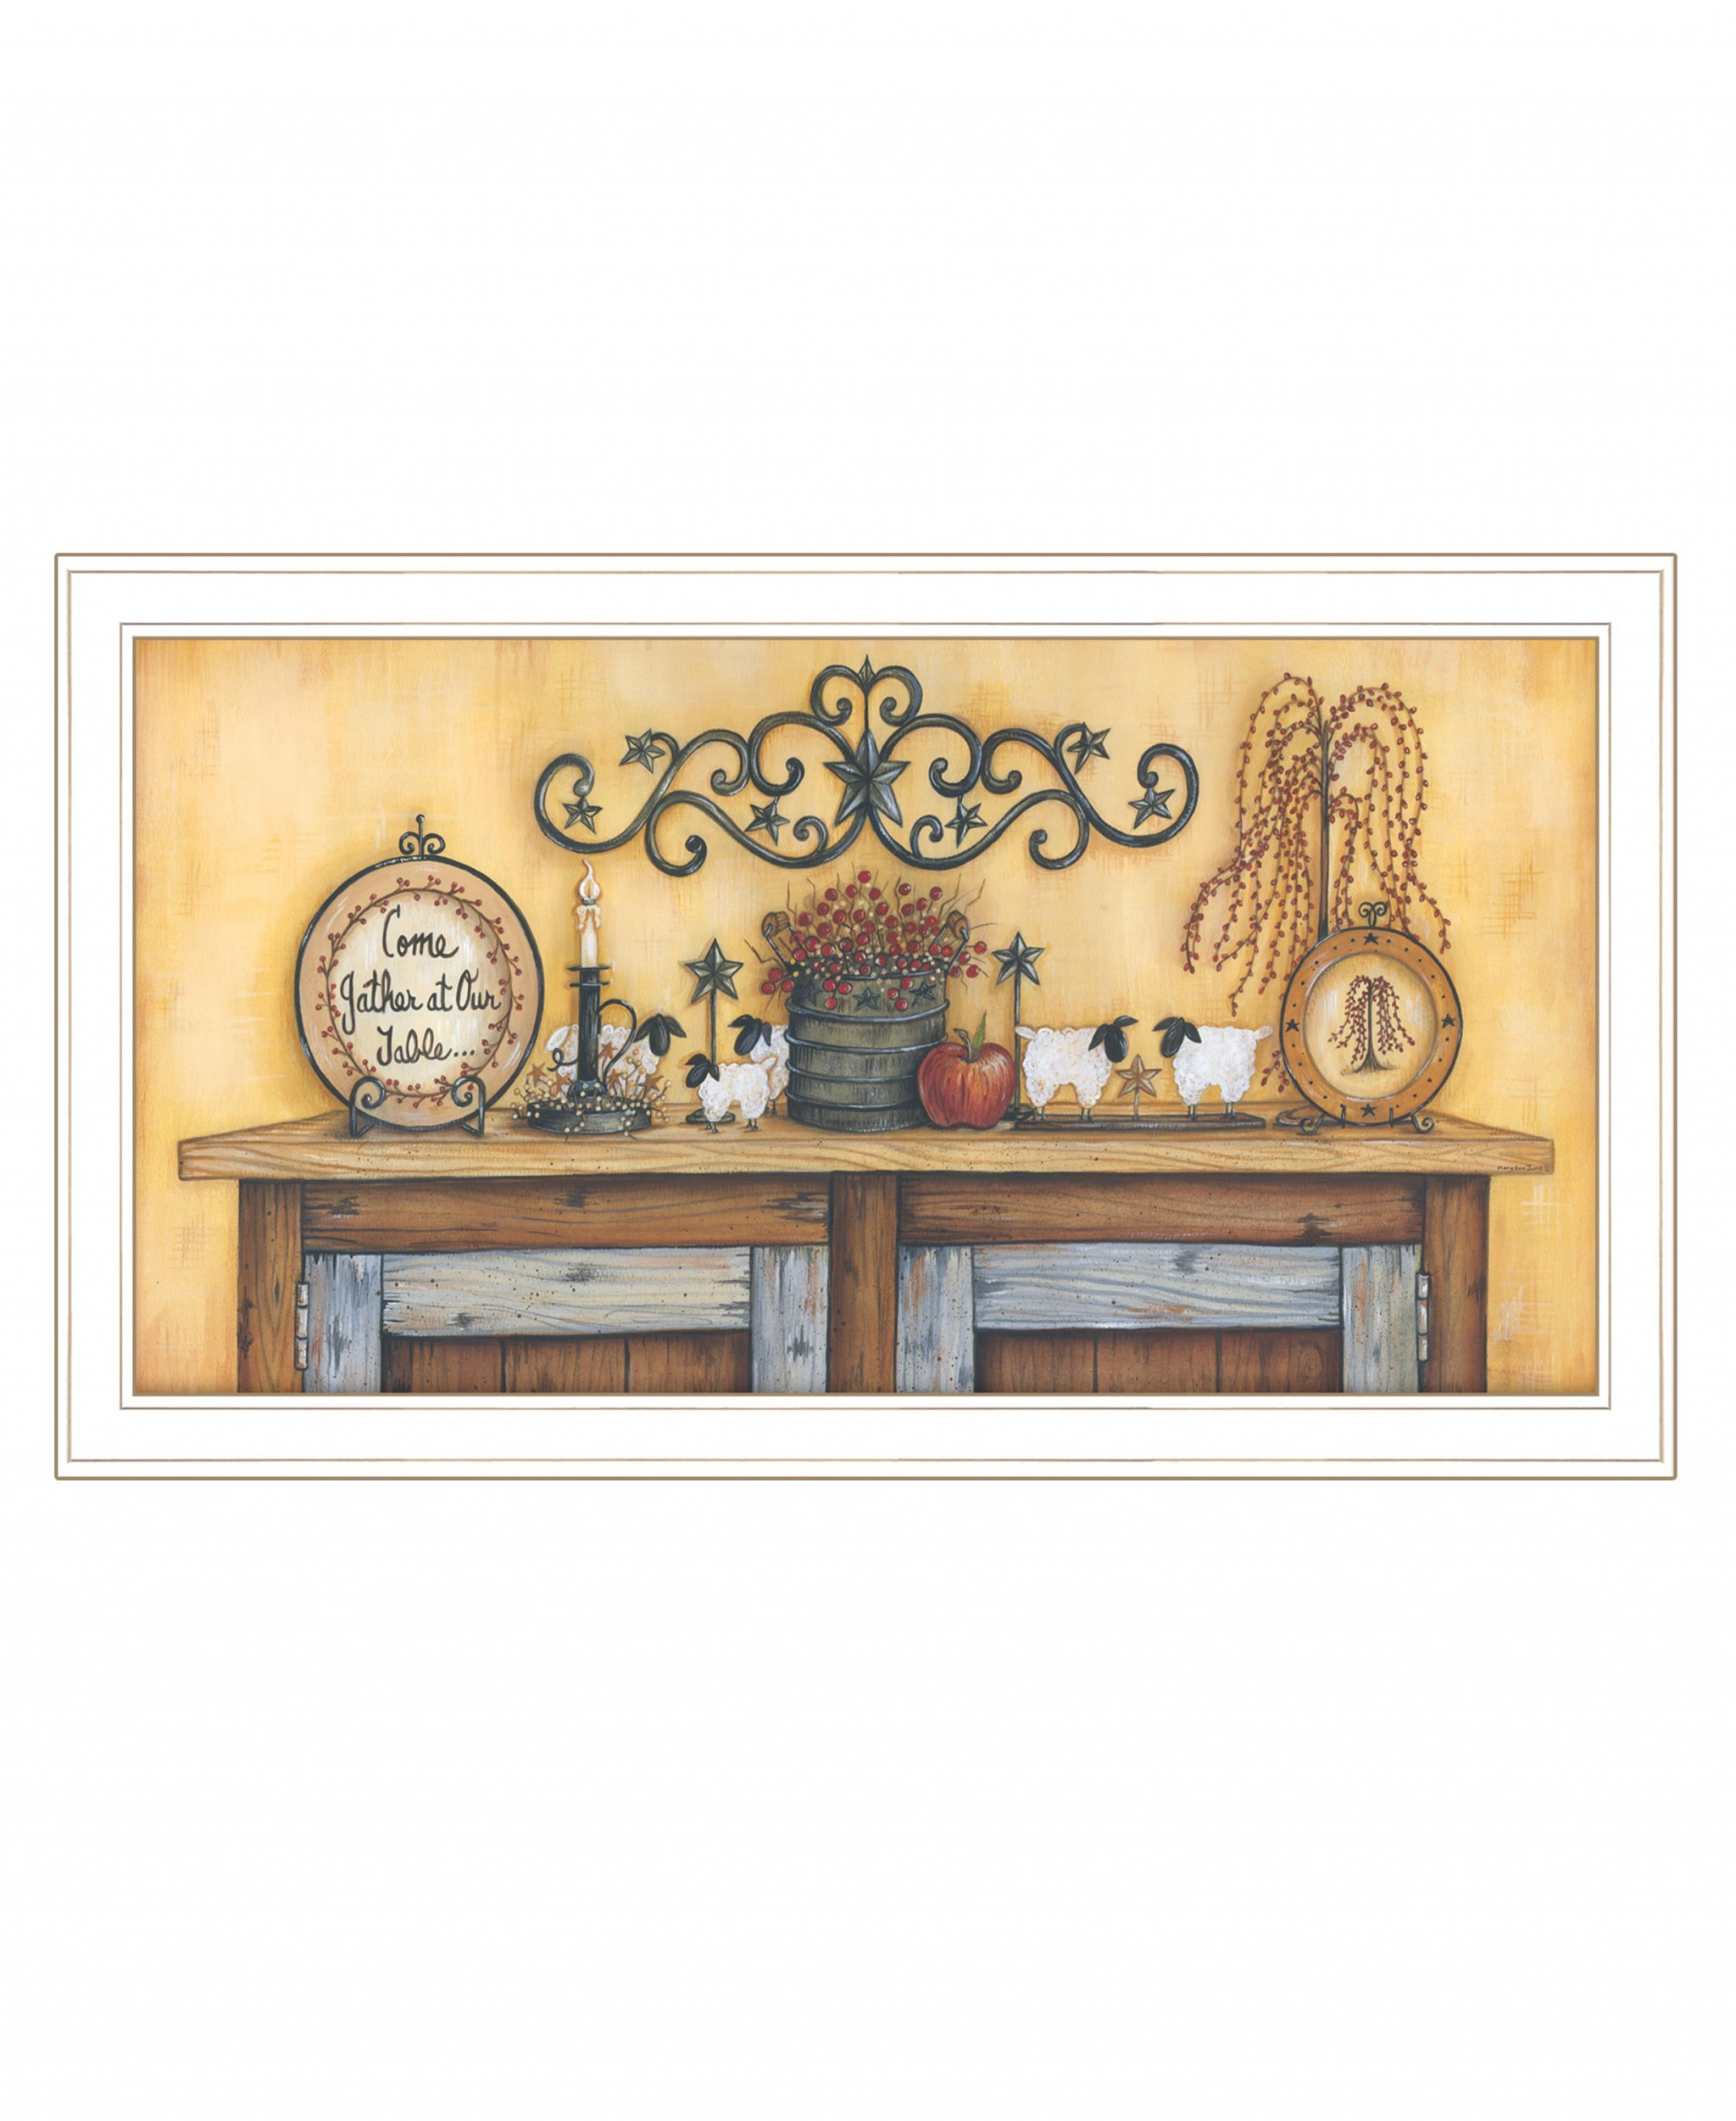 Come Gather At Our Table 3 White Framed Print Wall Art-407800-1